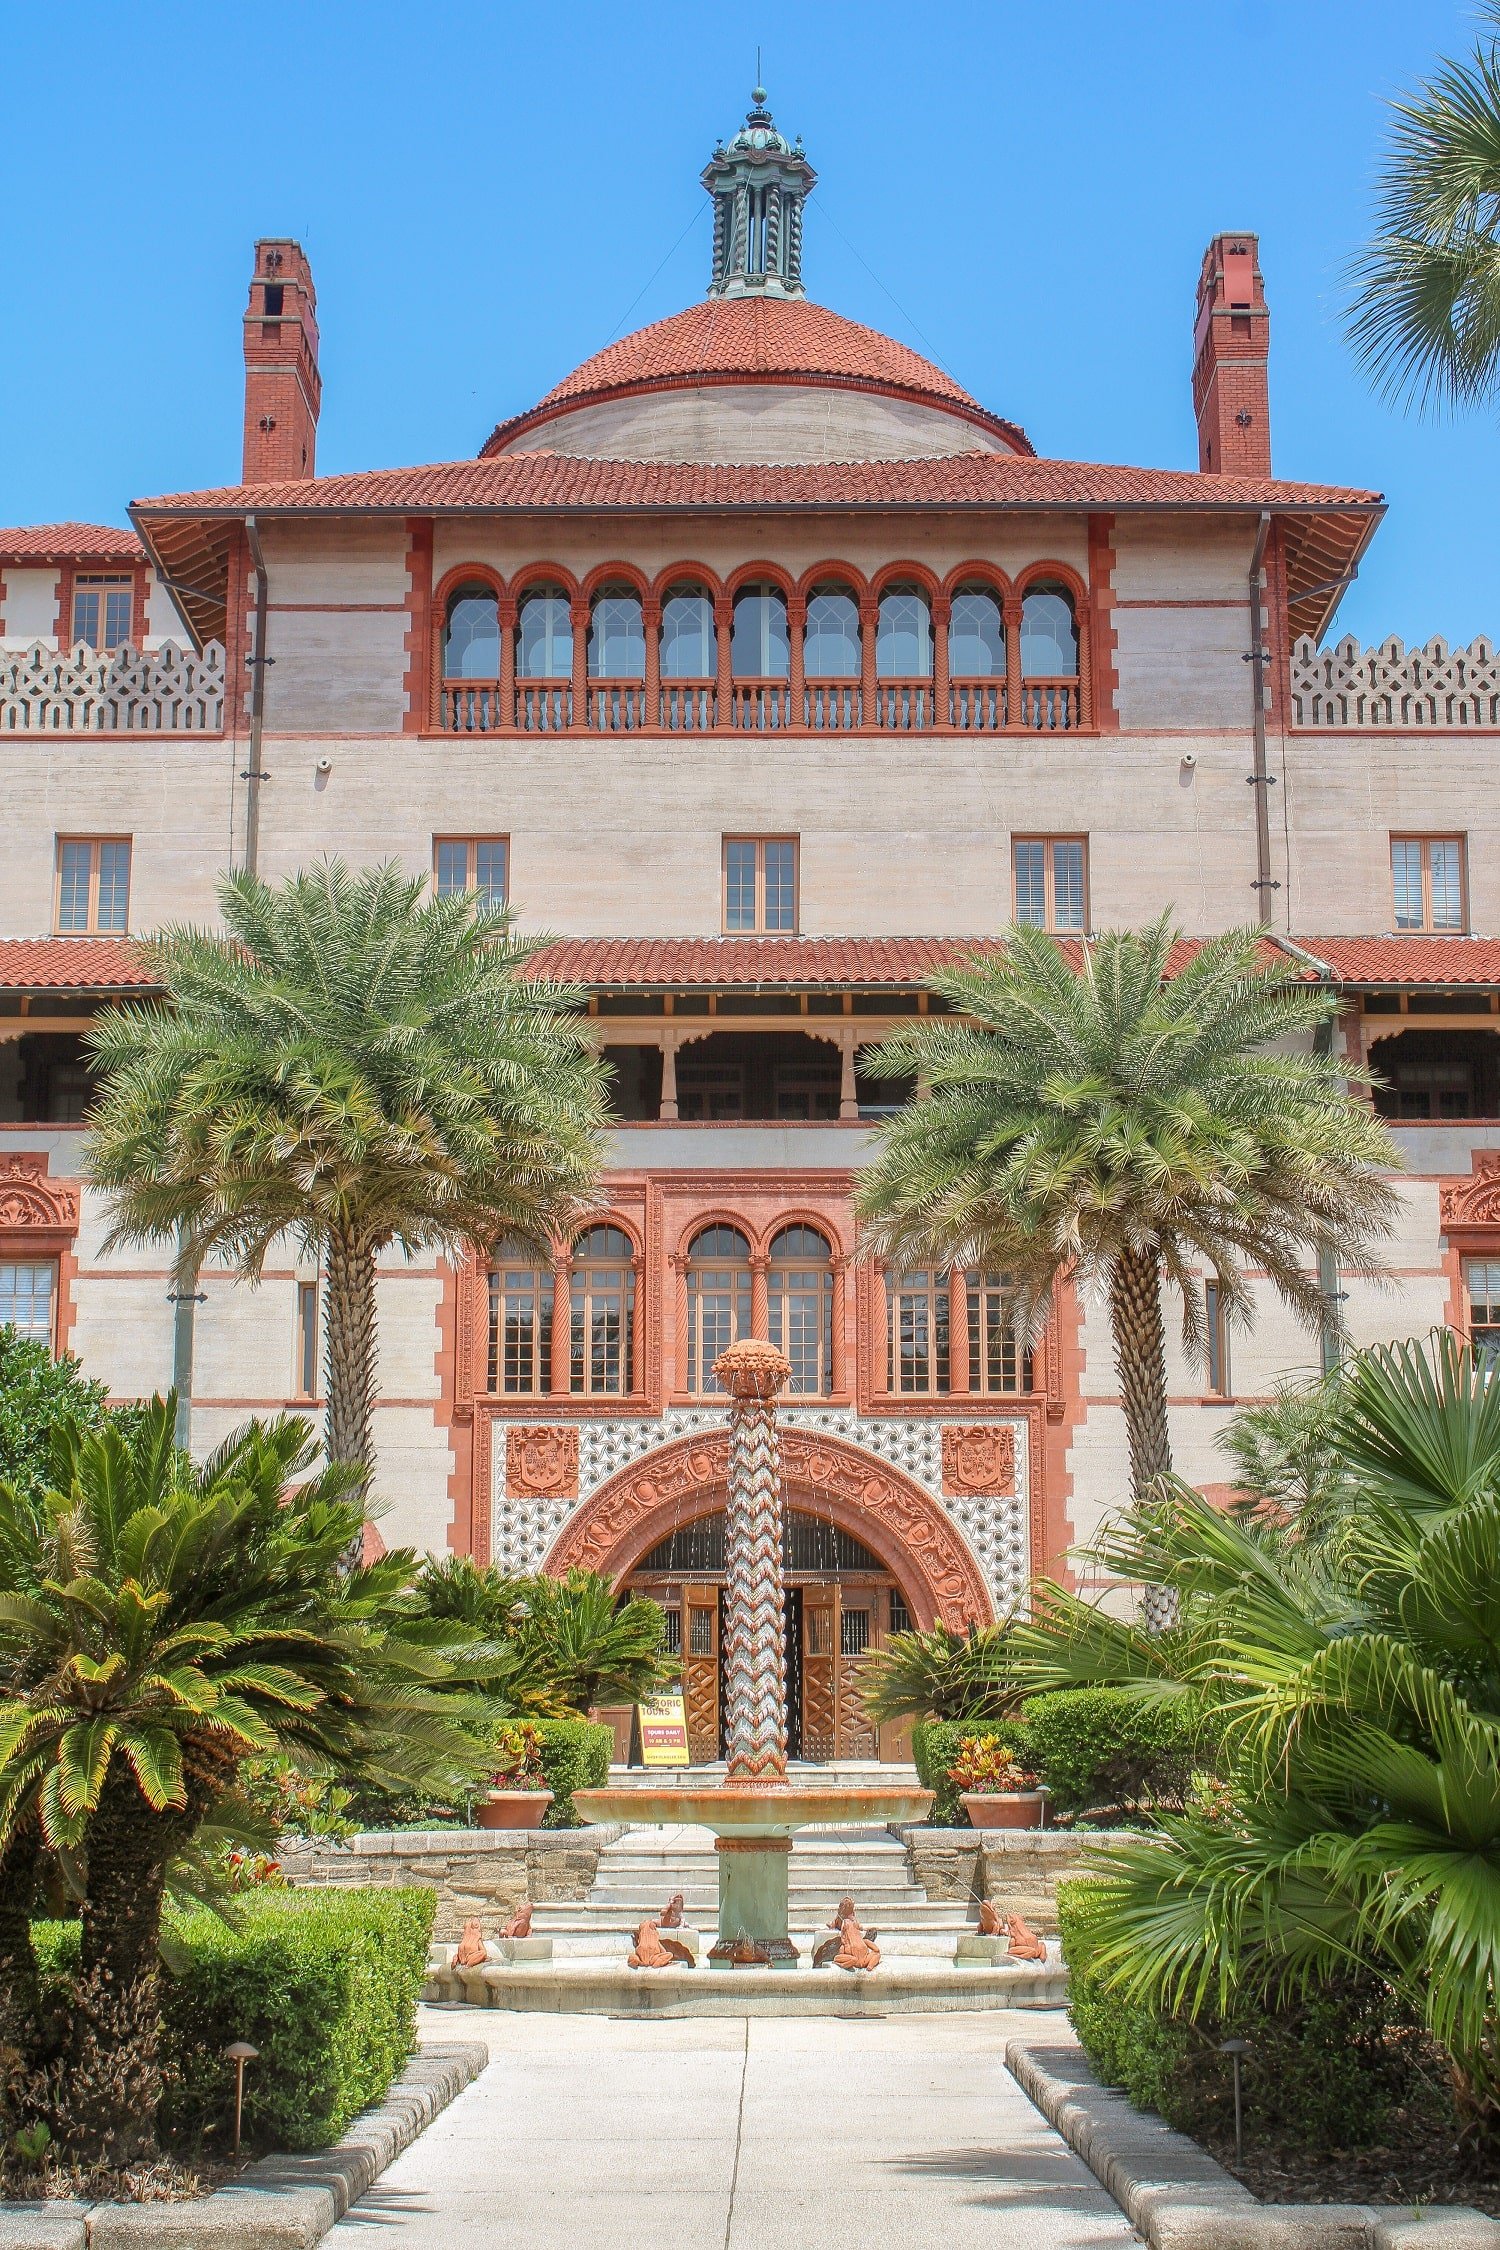 Saint Augustine, a slice of Europe in Florida | Blooming Magnolias Blog | Travel, Florida travel, historic places, historic cities, Flagler College